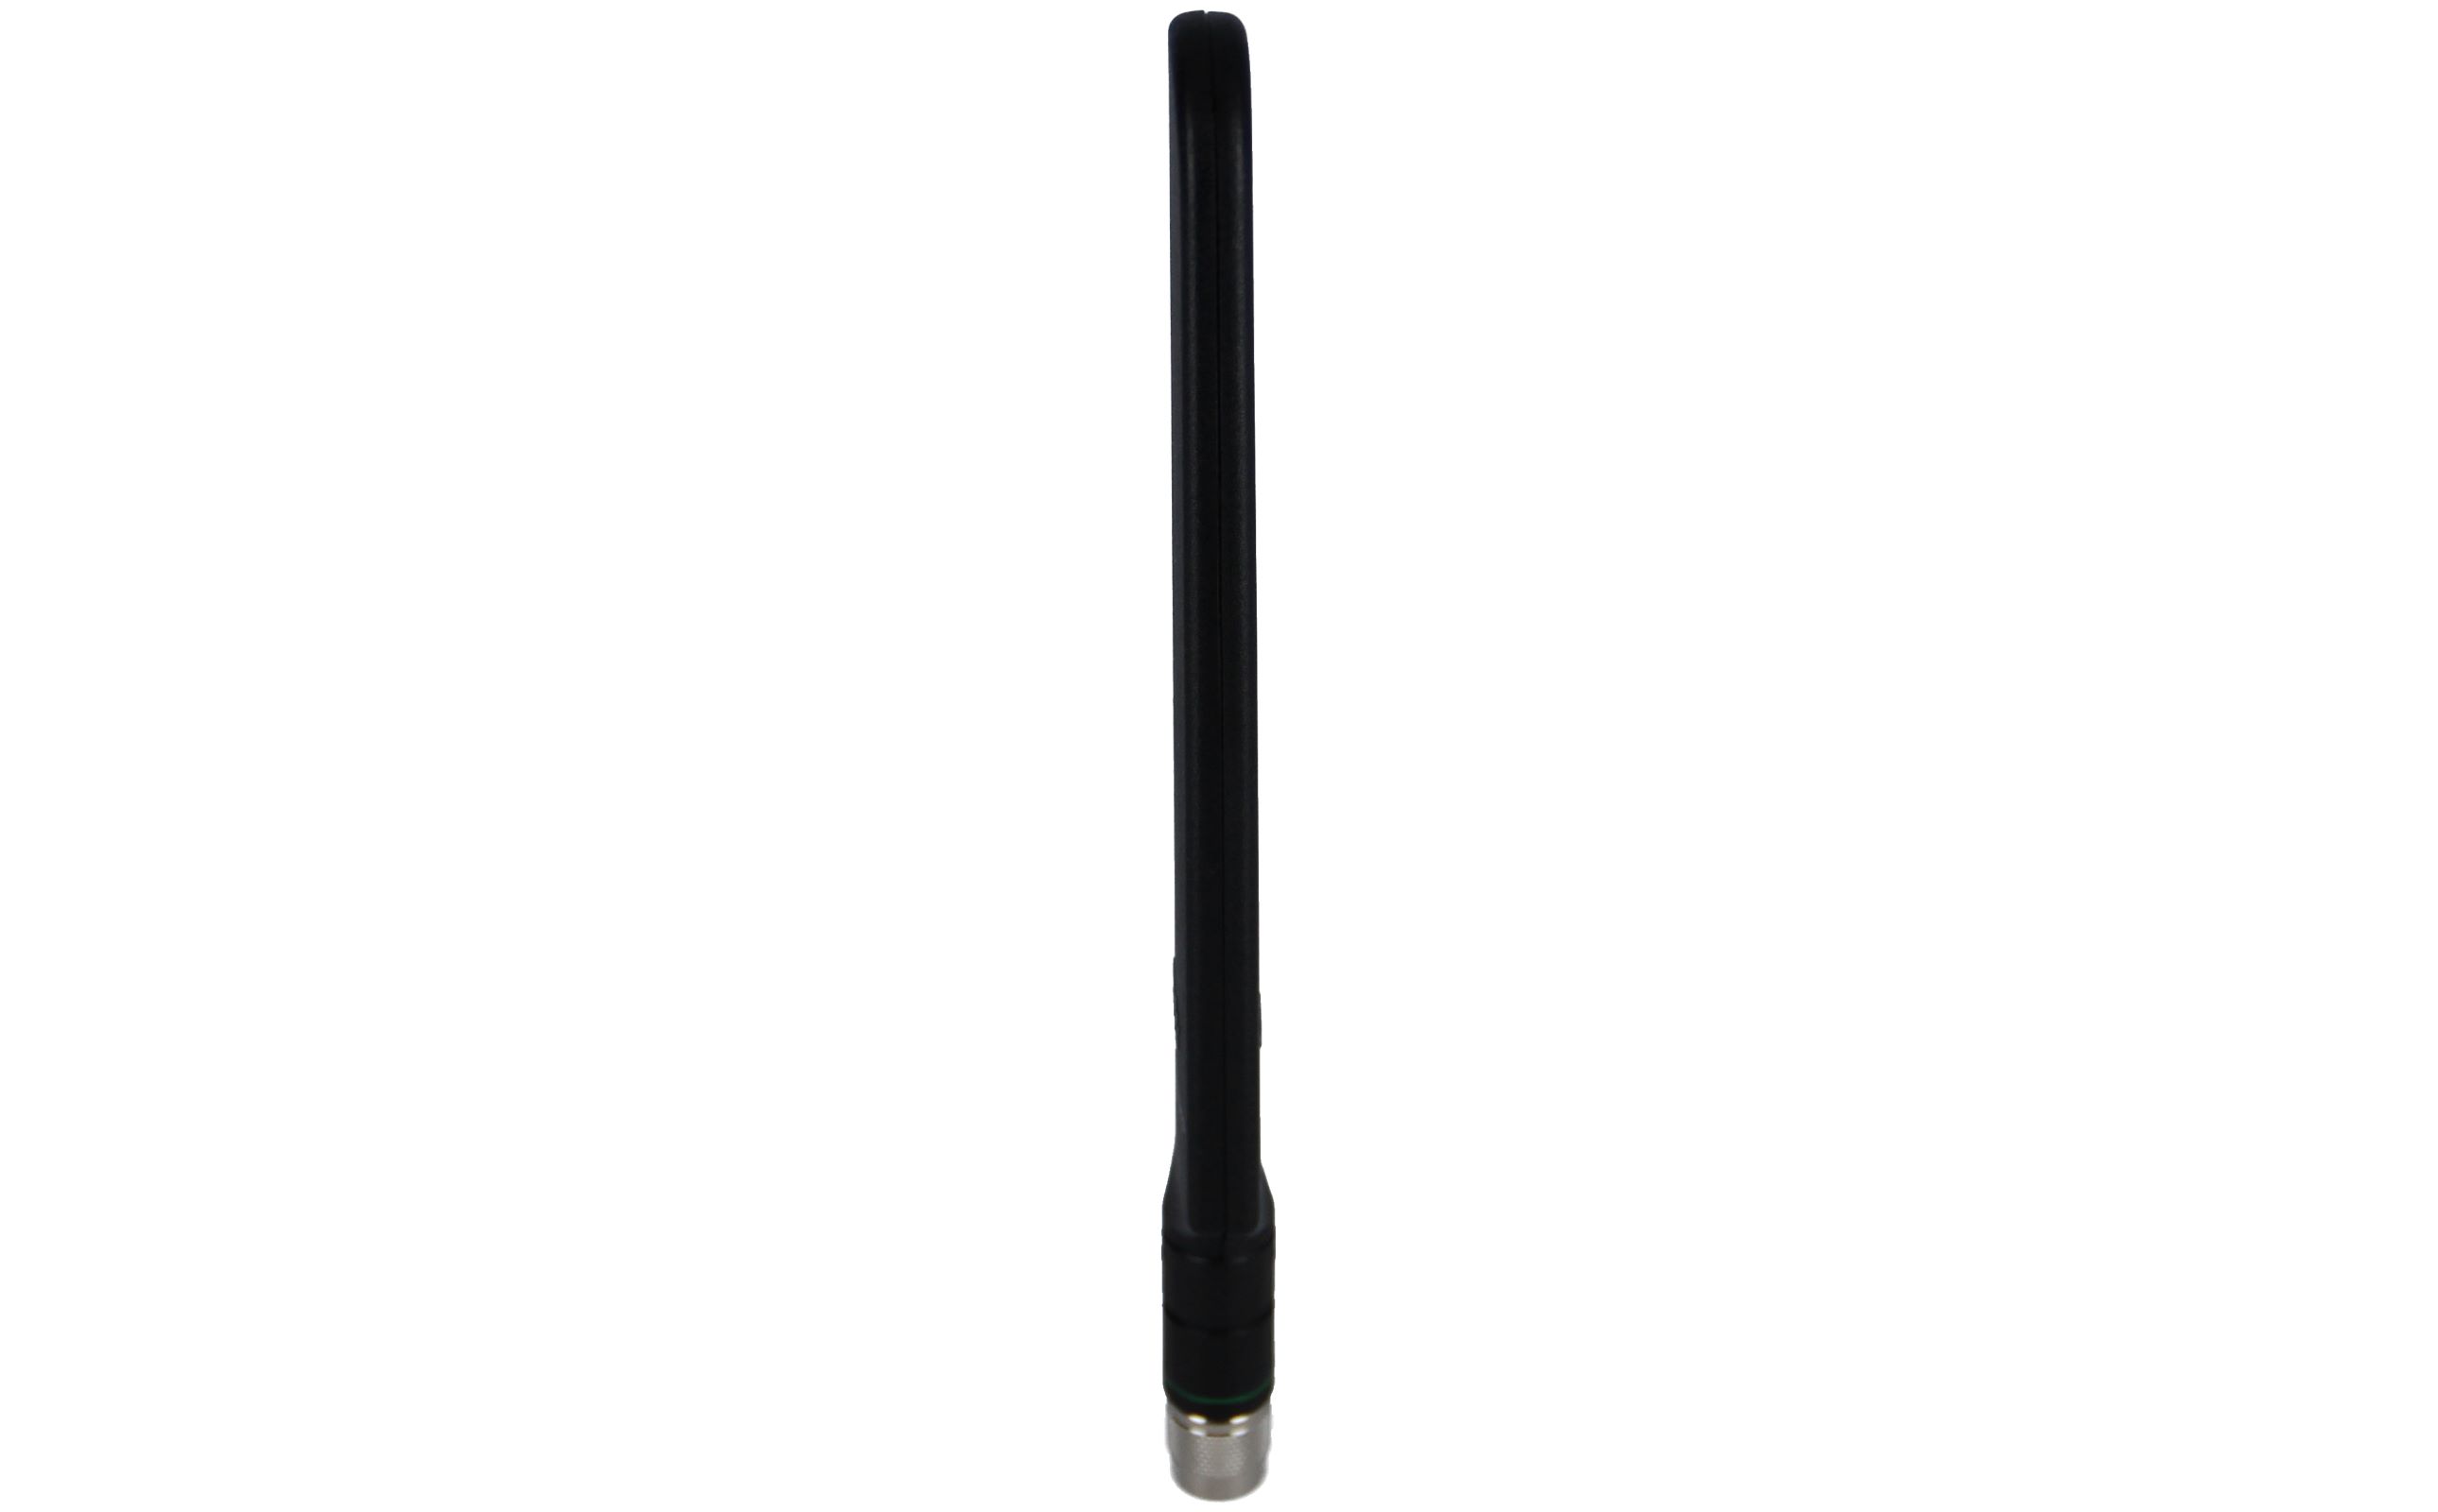 Cisco 4G-LTE-ANTM-D= 4G LTE articulating dipole antenna 700MHz-2600MHz  bands new and refurbished buy online low prices